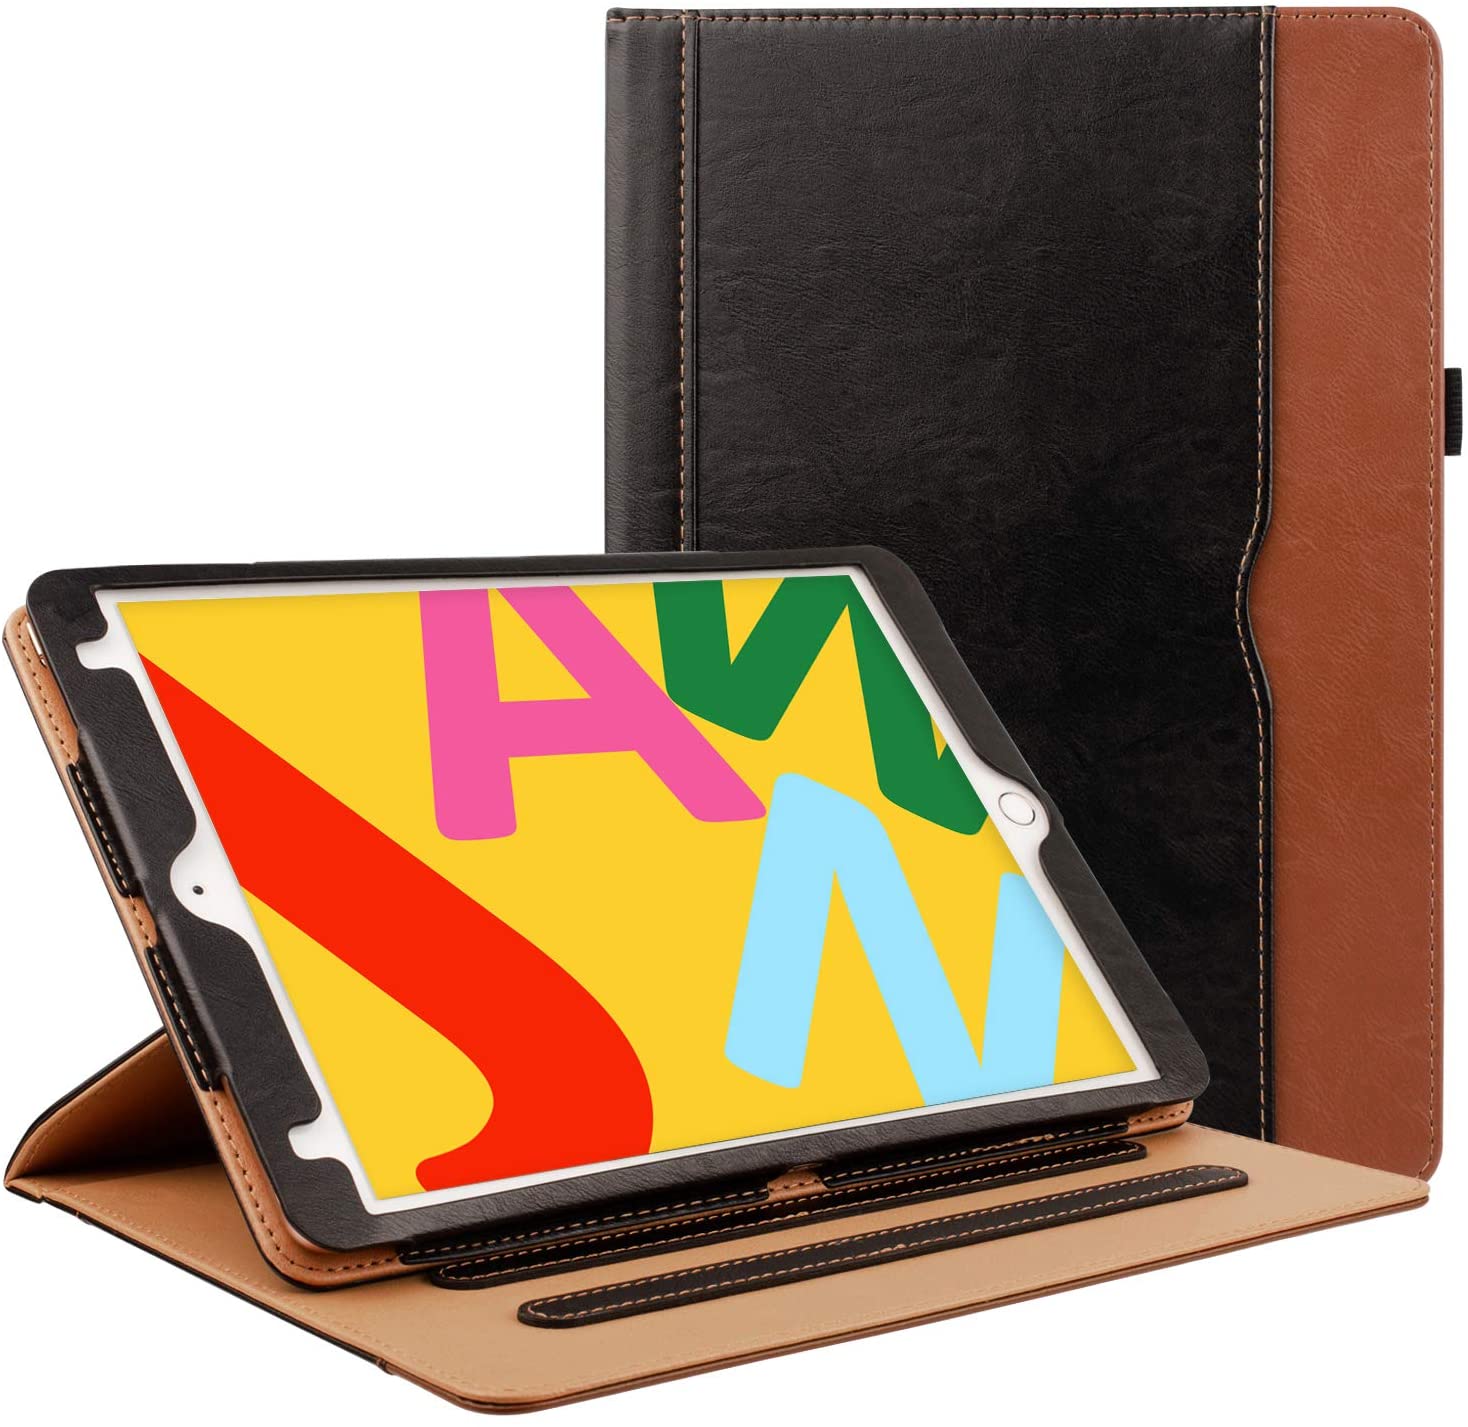 iPad 6th/5th Generation 9.7 inch 2018/2017 Leather Case -  Black/Brown. - e4cents